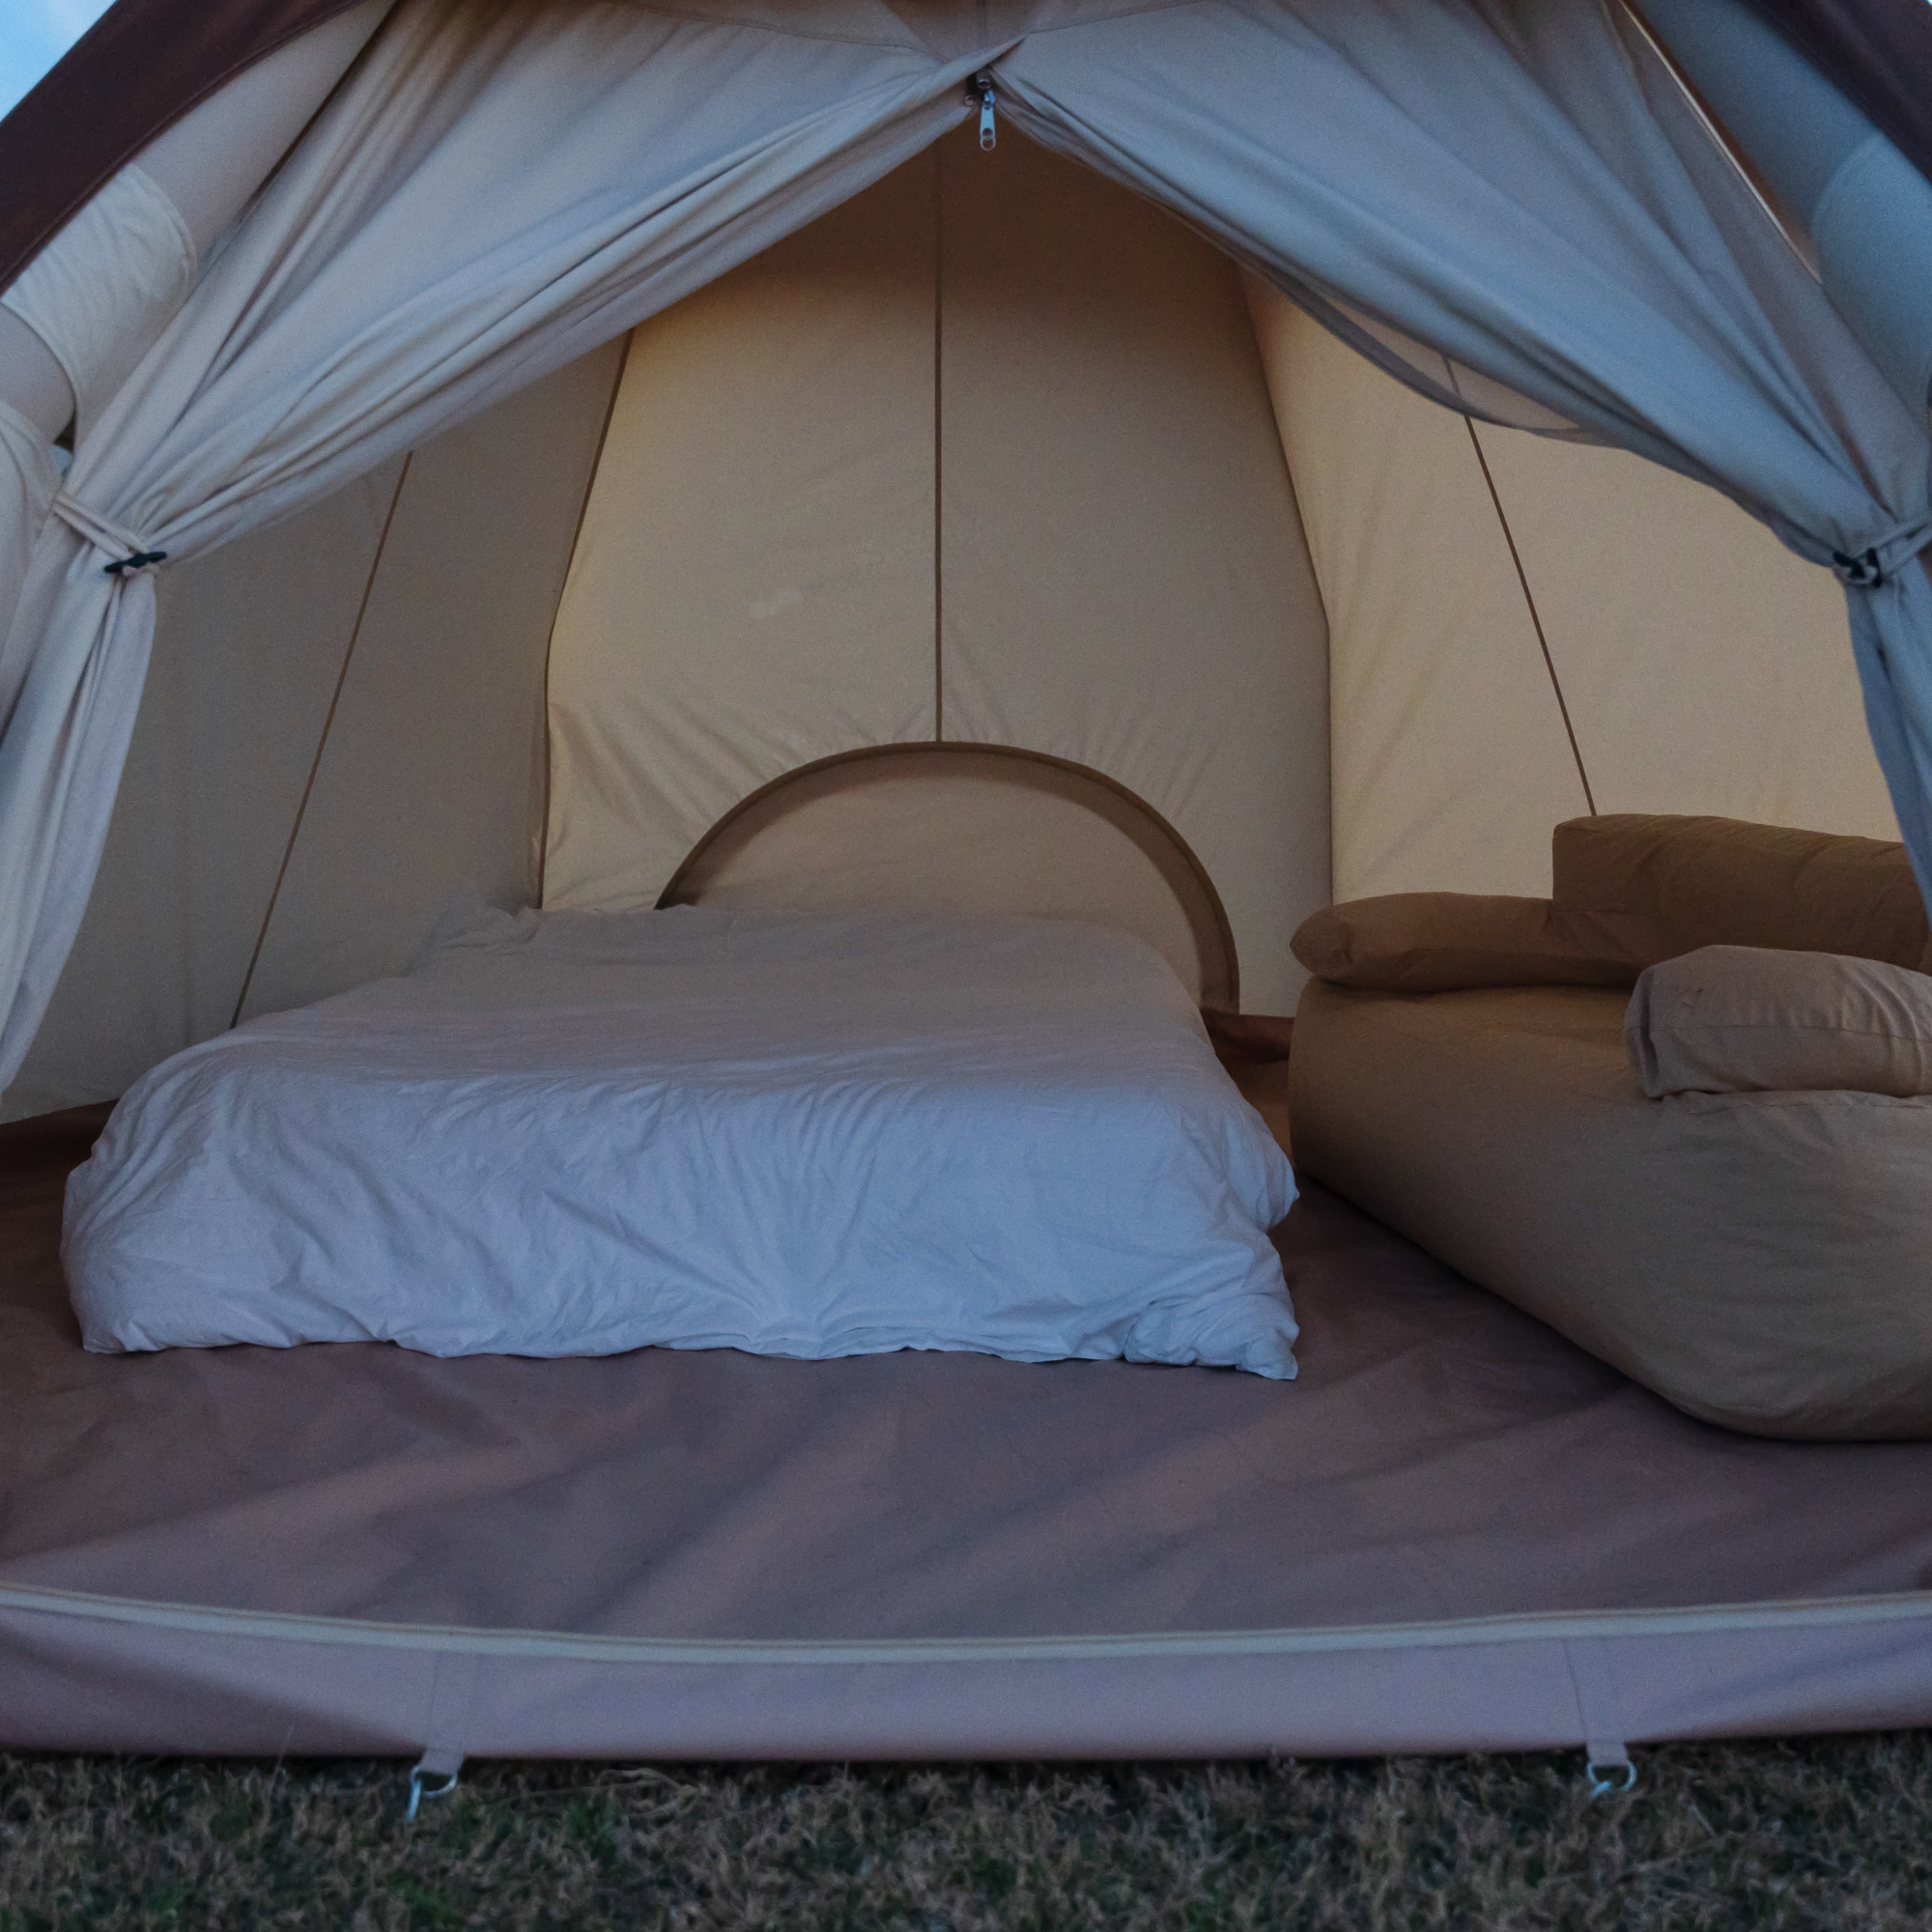 Frequently Asked Questions About Inflatable Tents